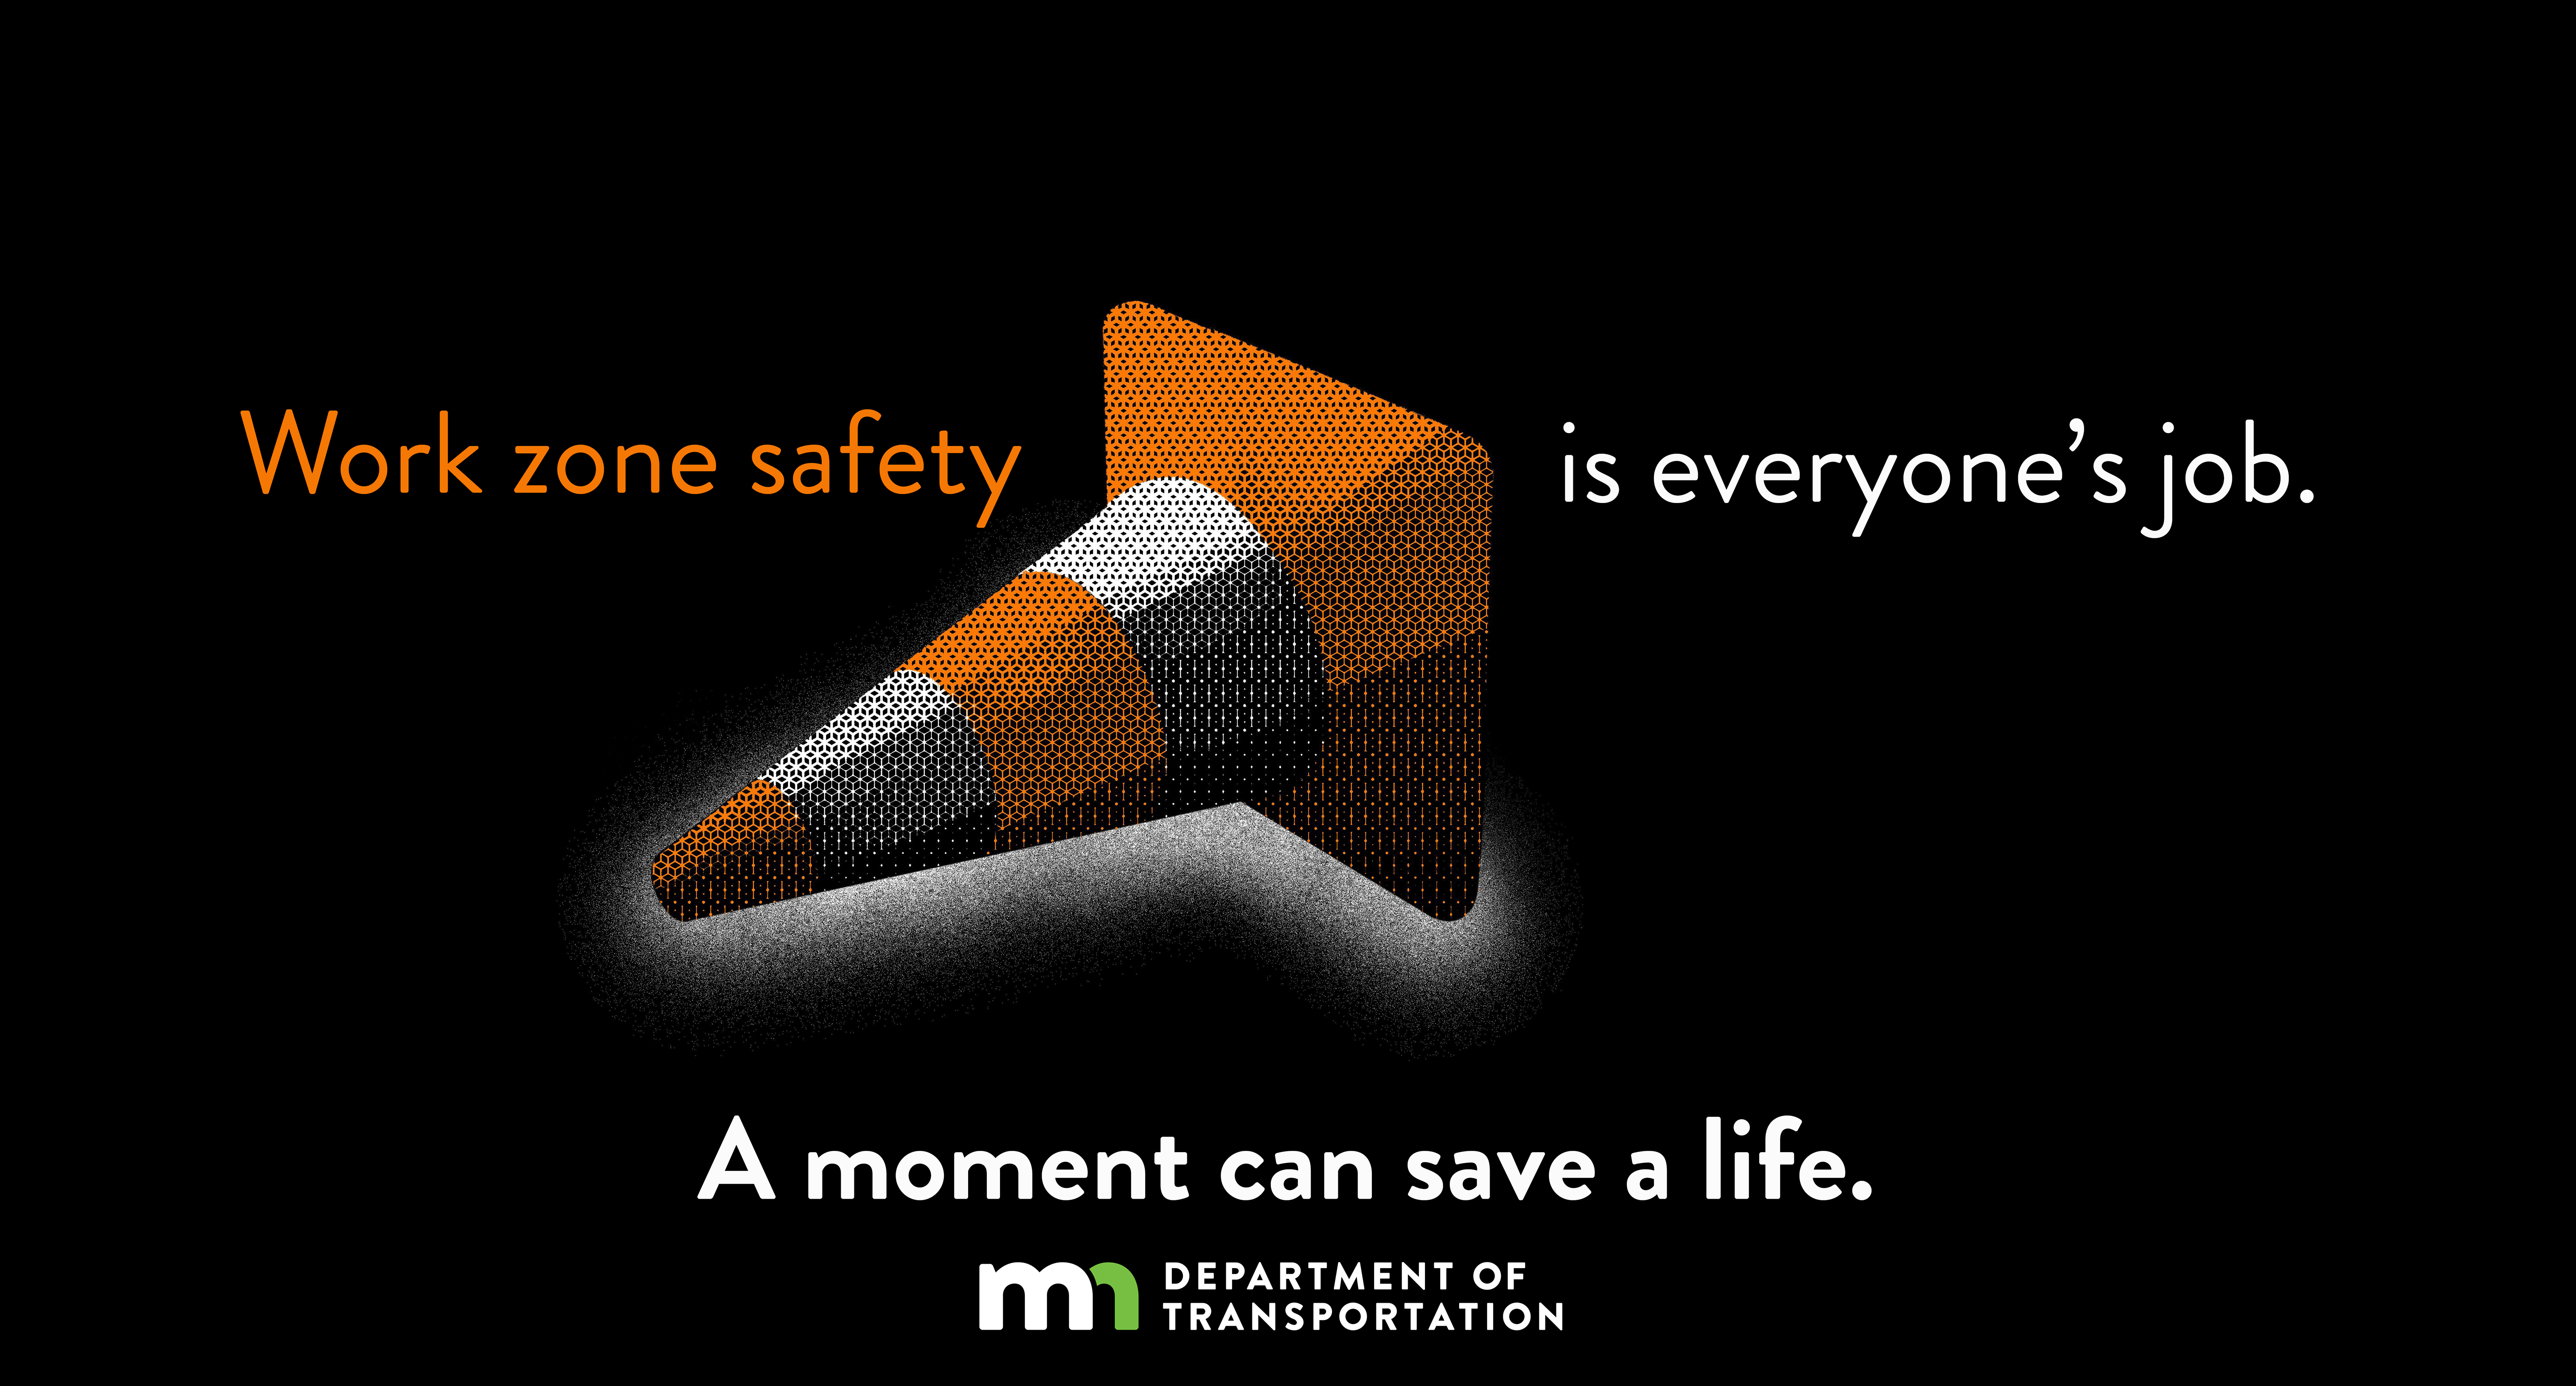 Work zone safety is everyone's job. A moment can save a life.